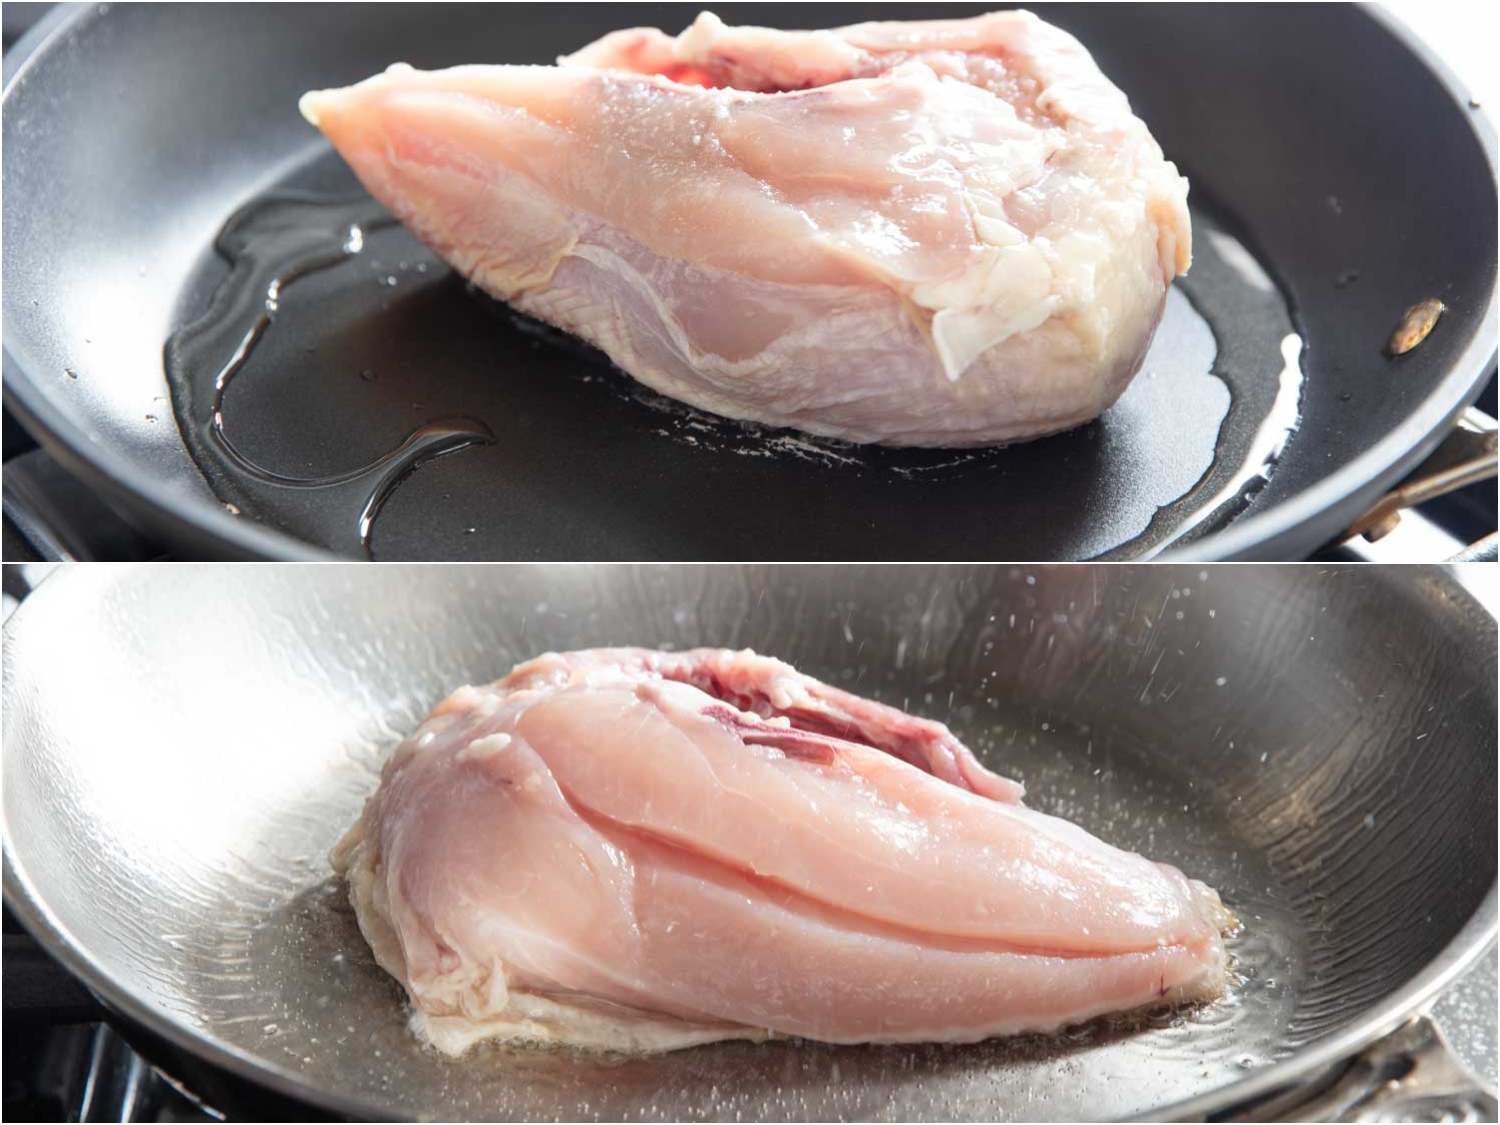 A side-by-side image showing how chicken adheres better to a stainless steel skillet than a nonstick one, leading to more complete browning